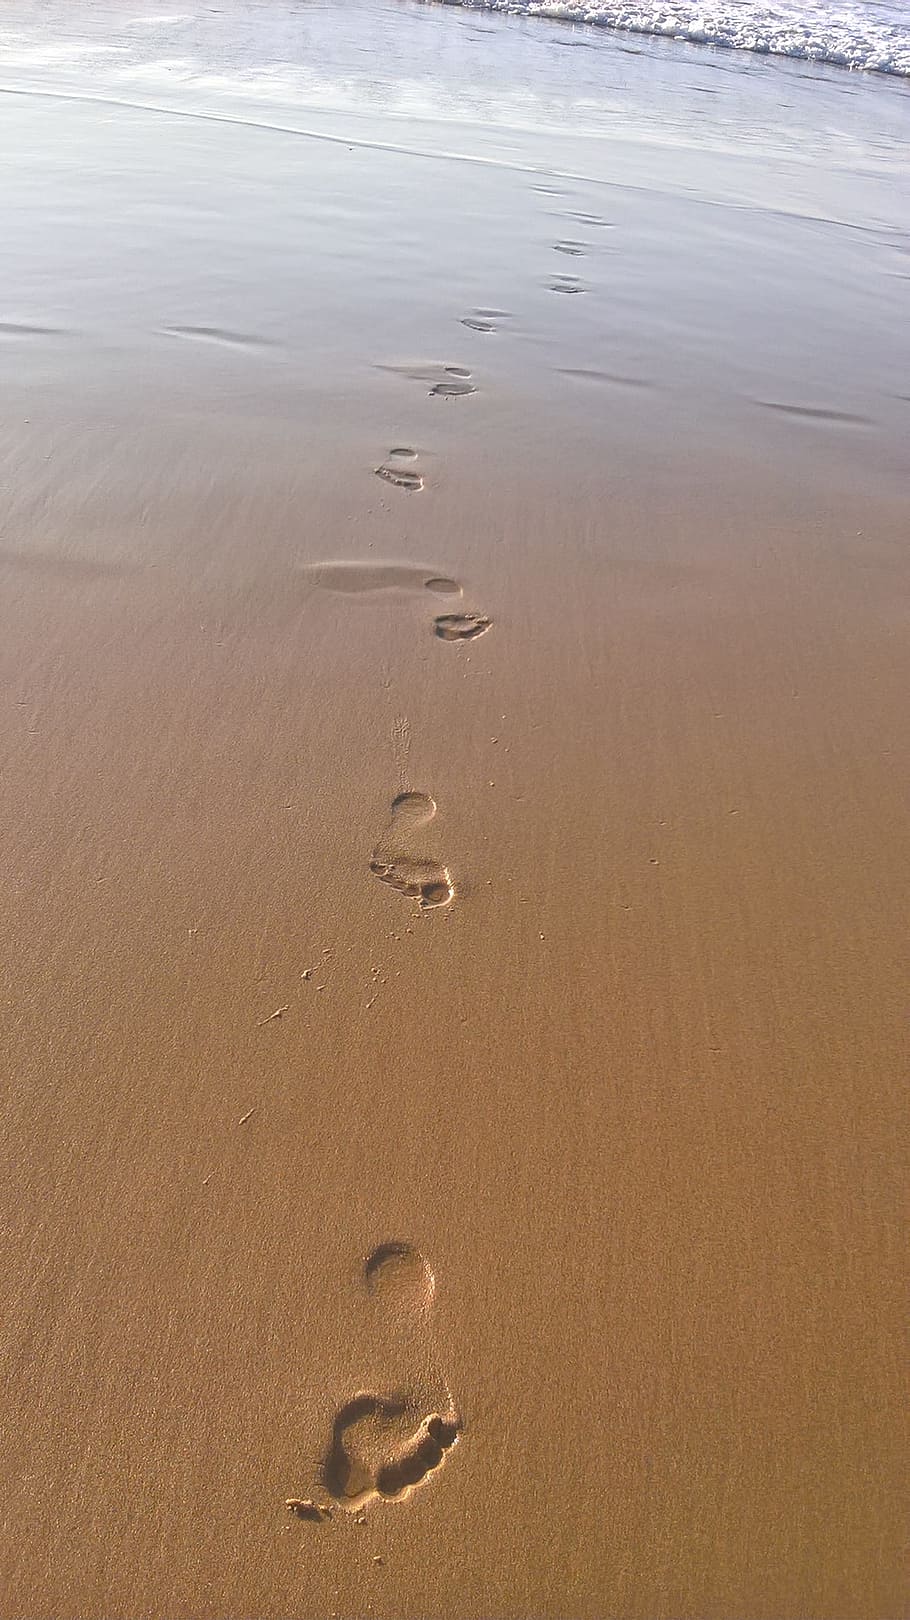 footstep, beach, sea, sand, water, land, nature, beauty in nature, footprint, high angle view